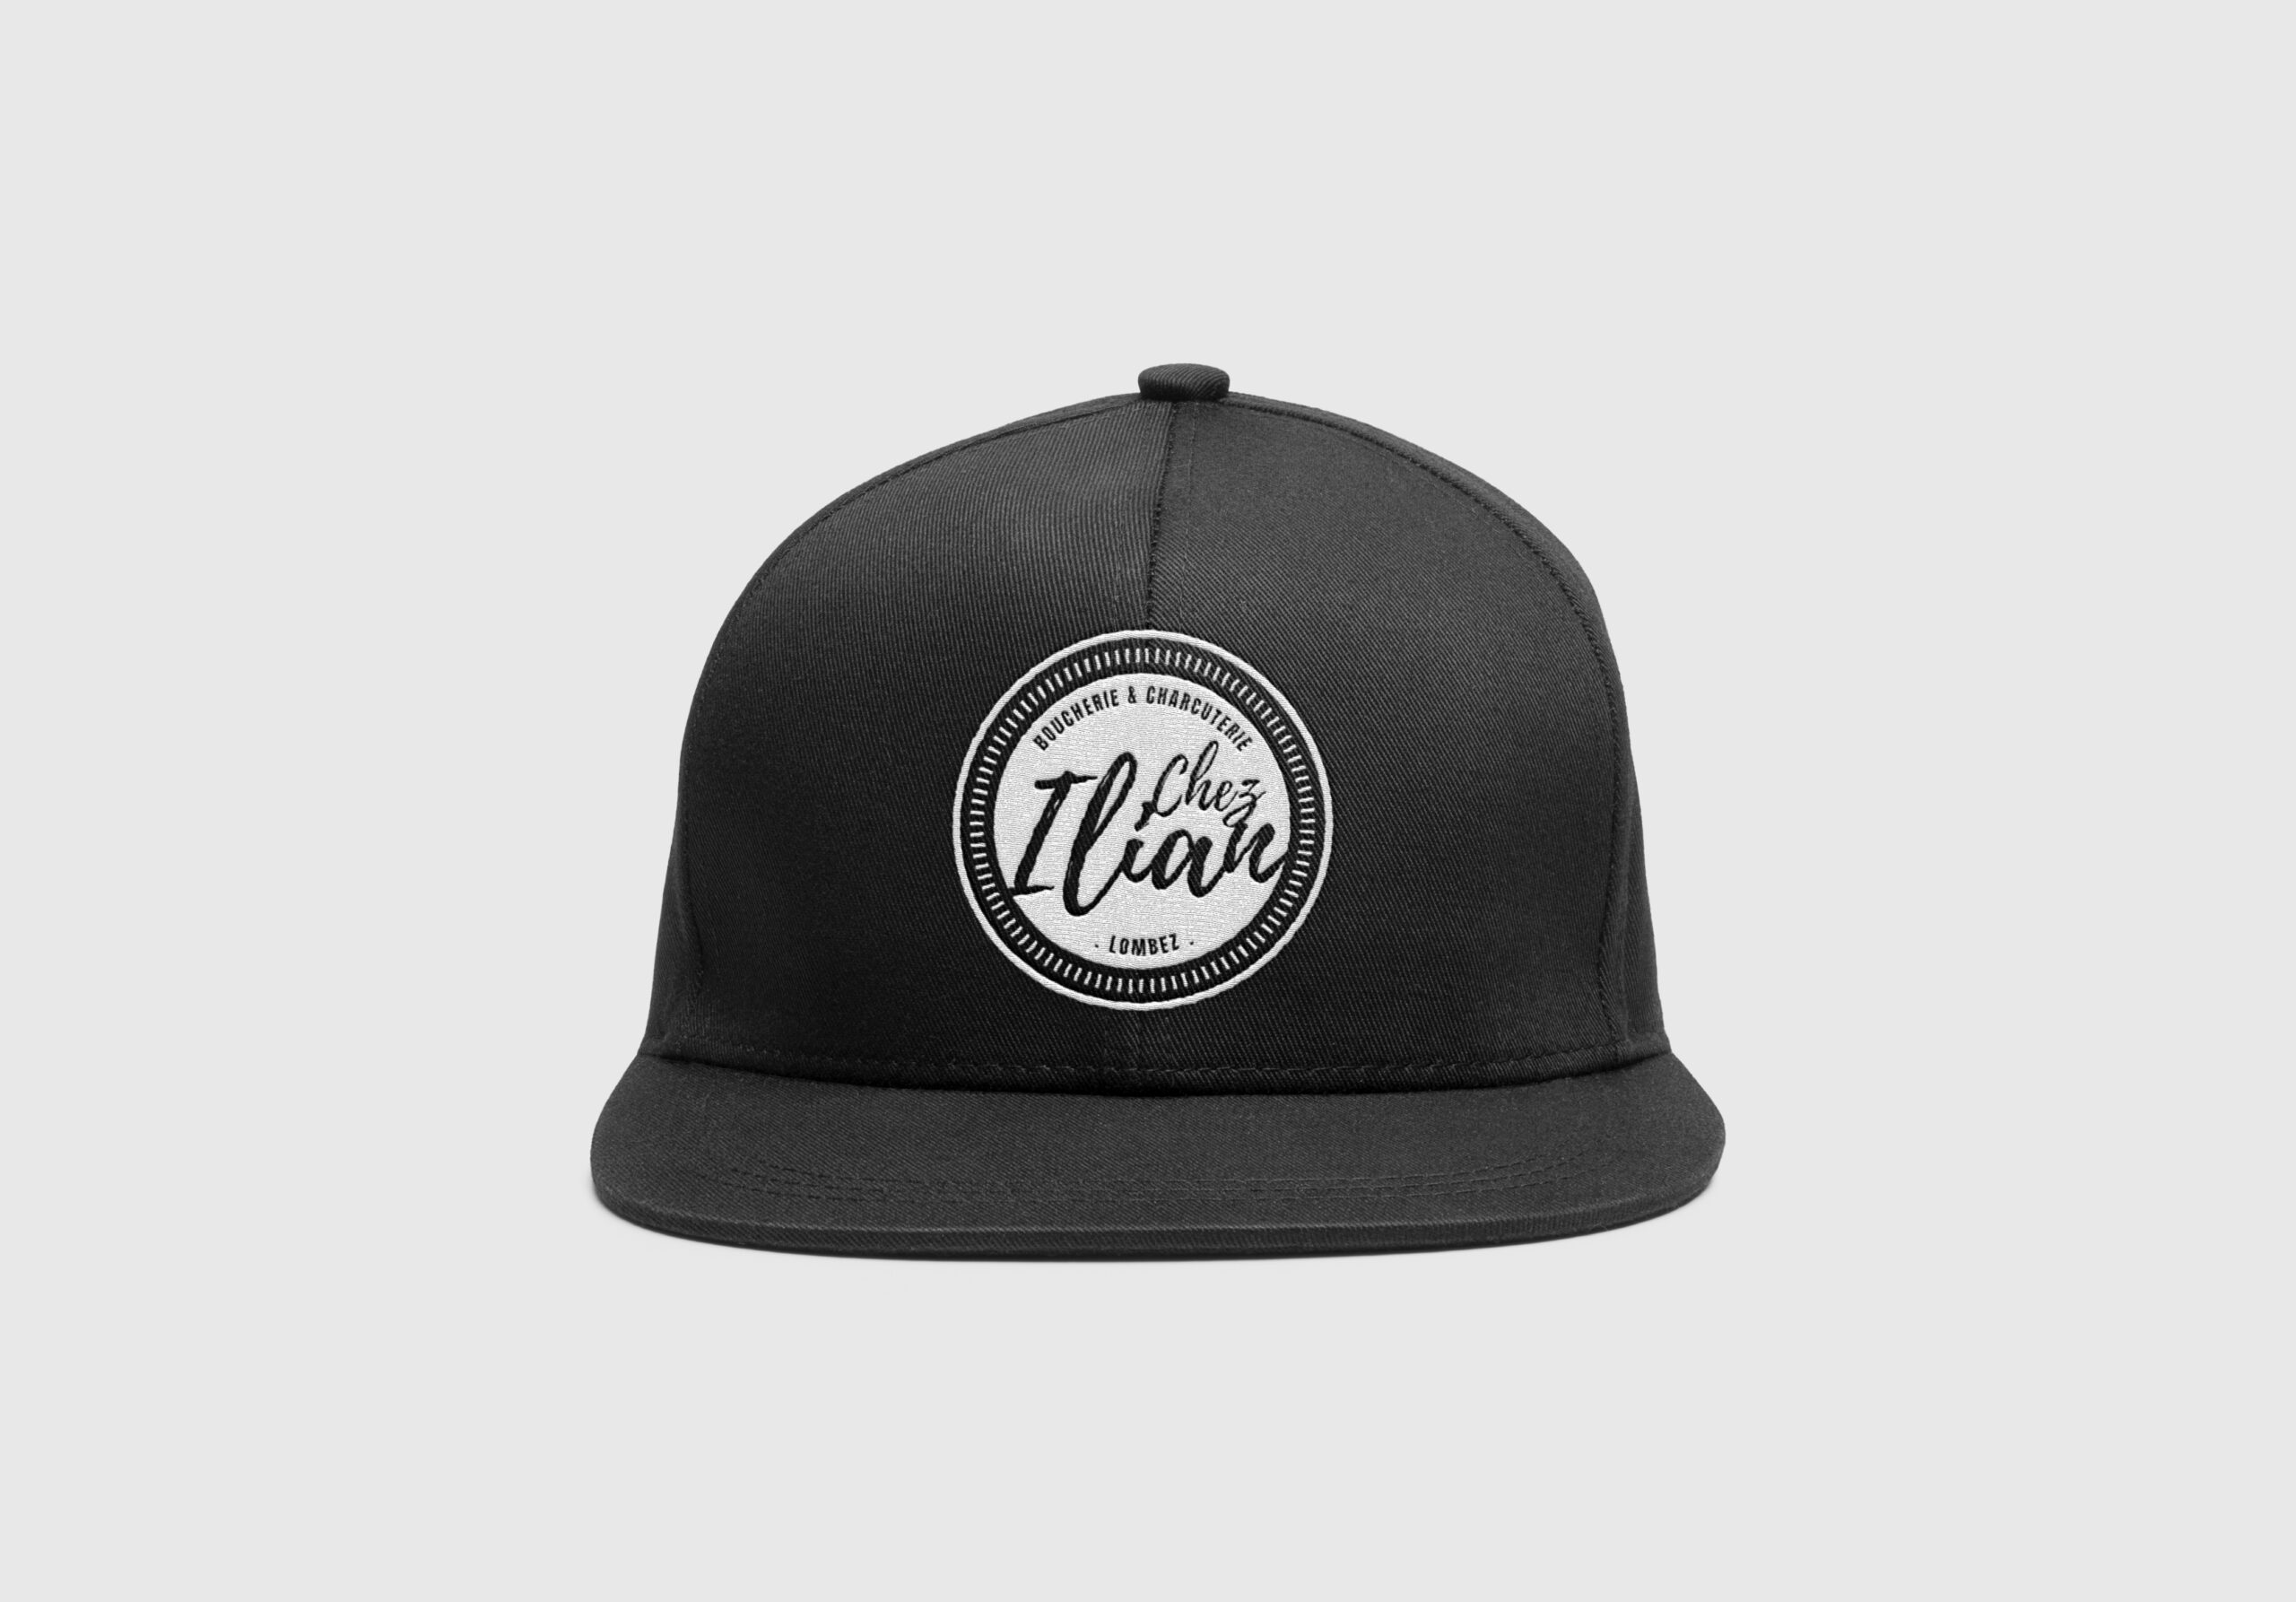 Mock up casquette broderie